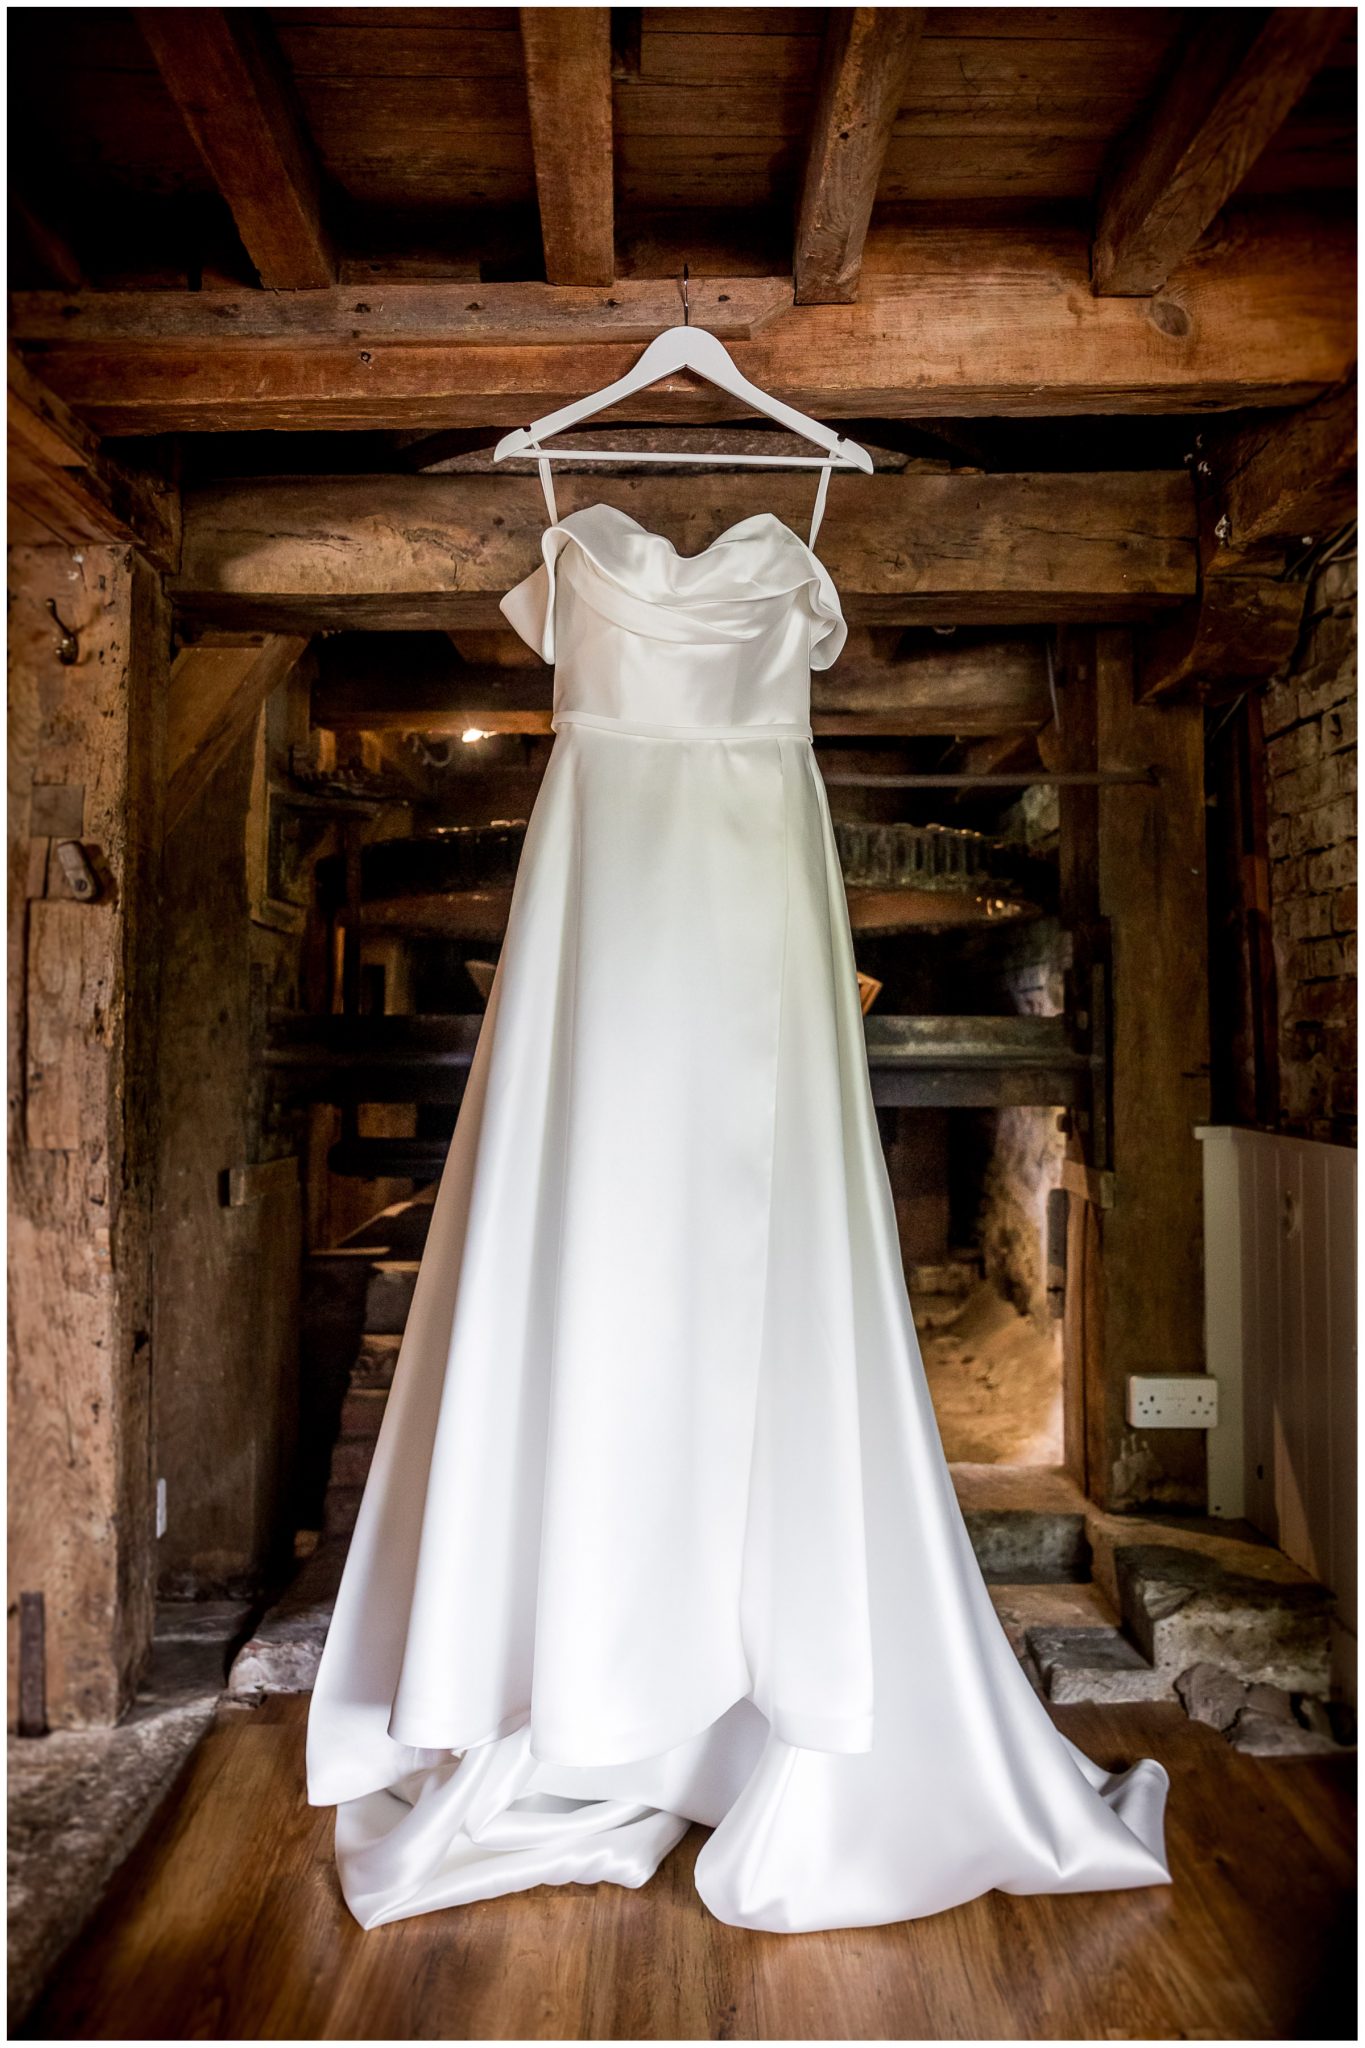 Wedding dress hanging in front of the old workings of the water mill